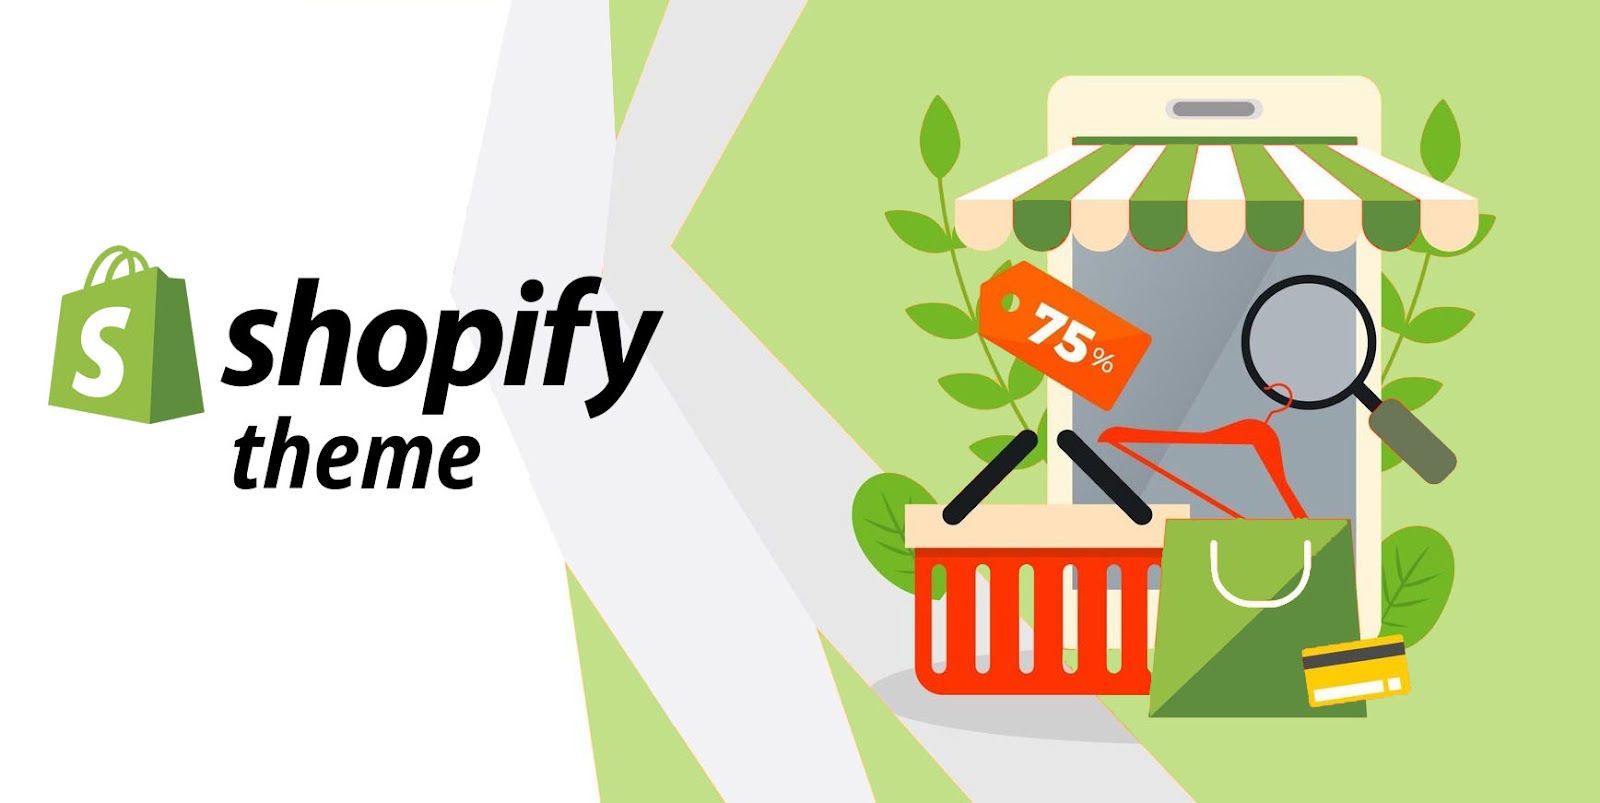 What is a Shopify theme